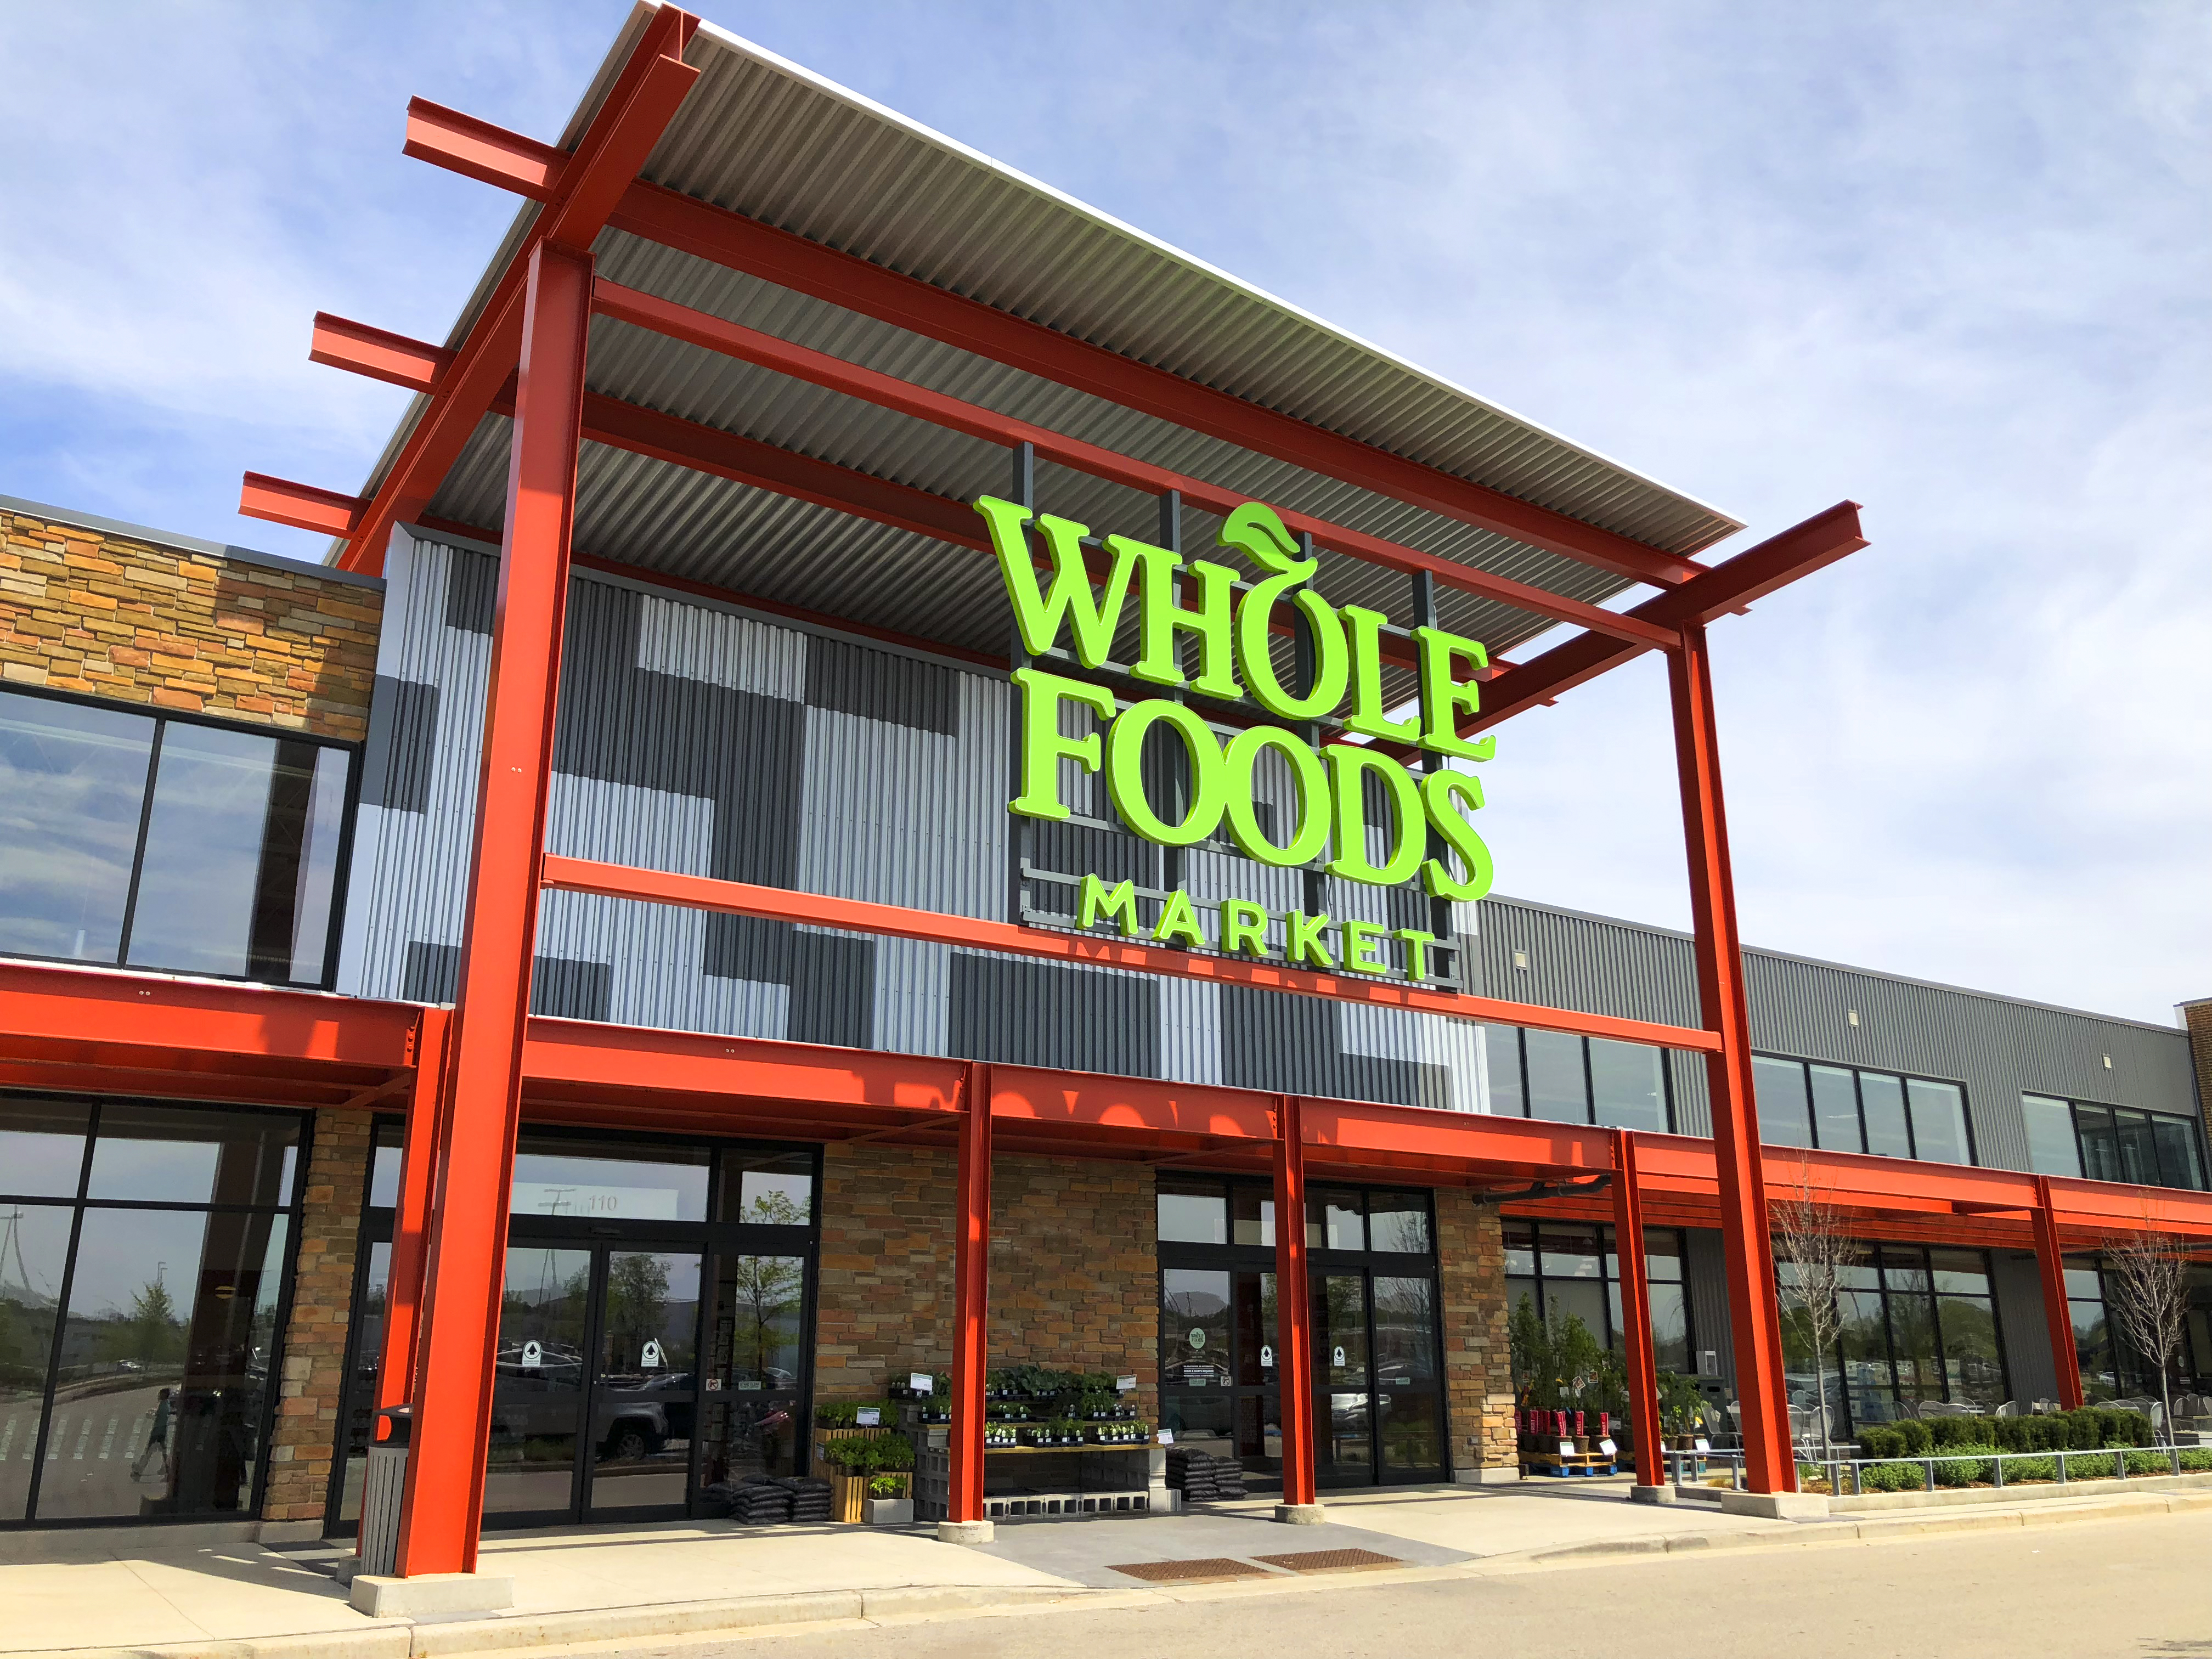 Whole Foods, part of the Maayfair Collection in Wauwatosa, WI